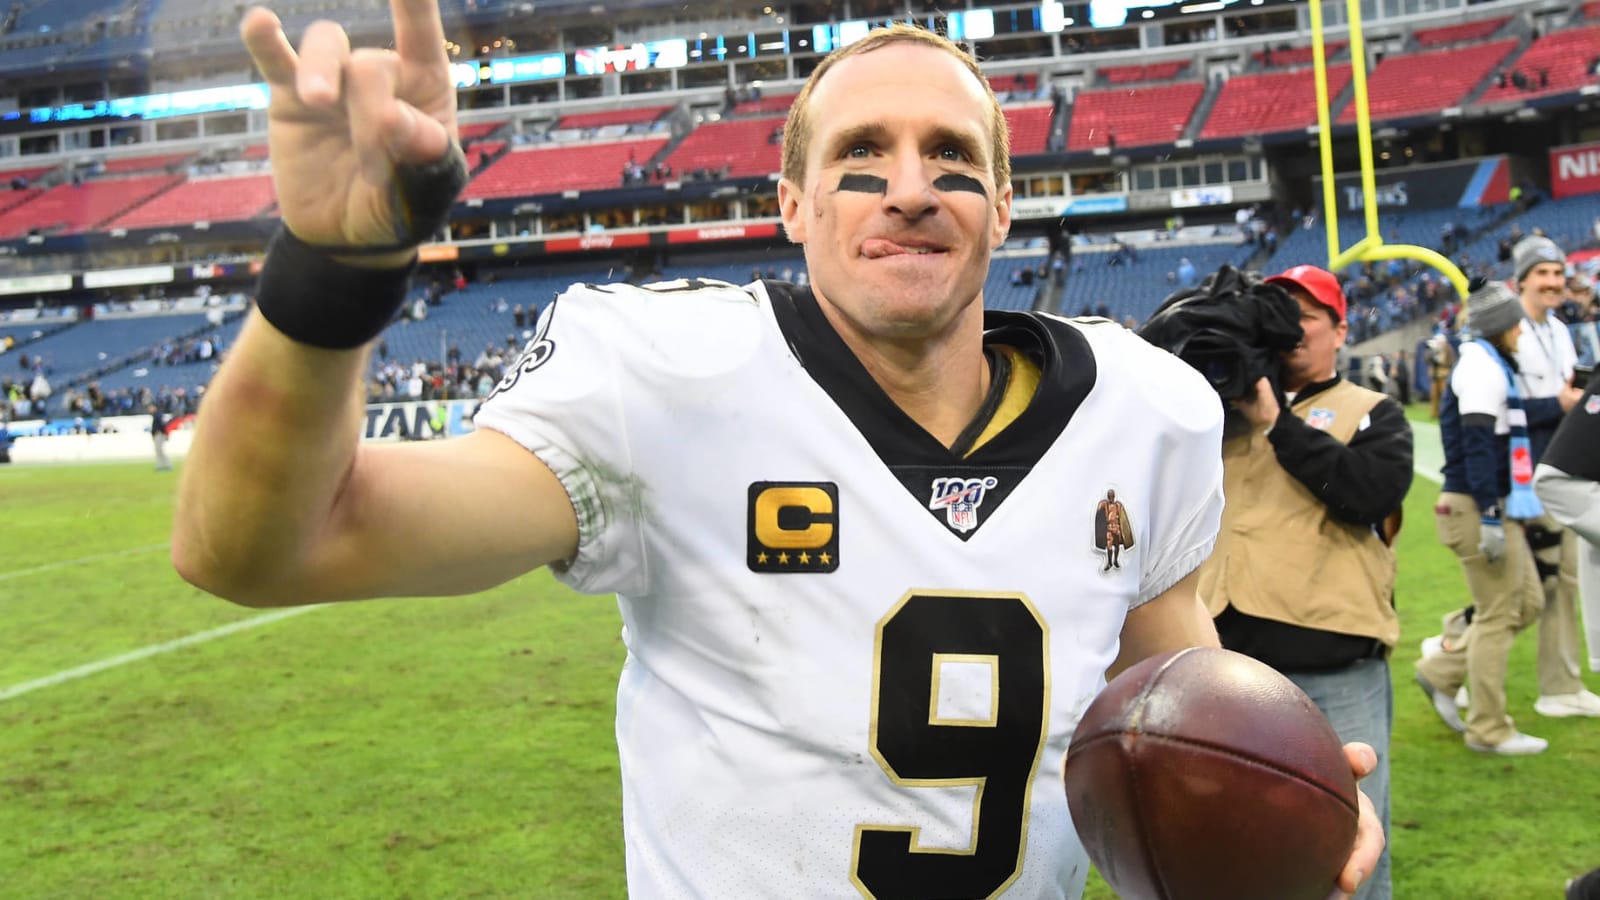 Drew Brees brings ‘straight heat’ when freestyle rapping?